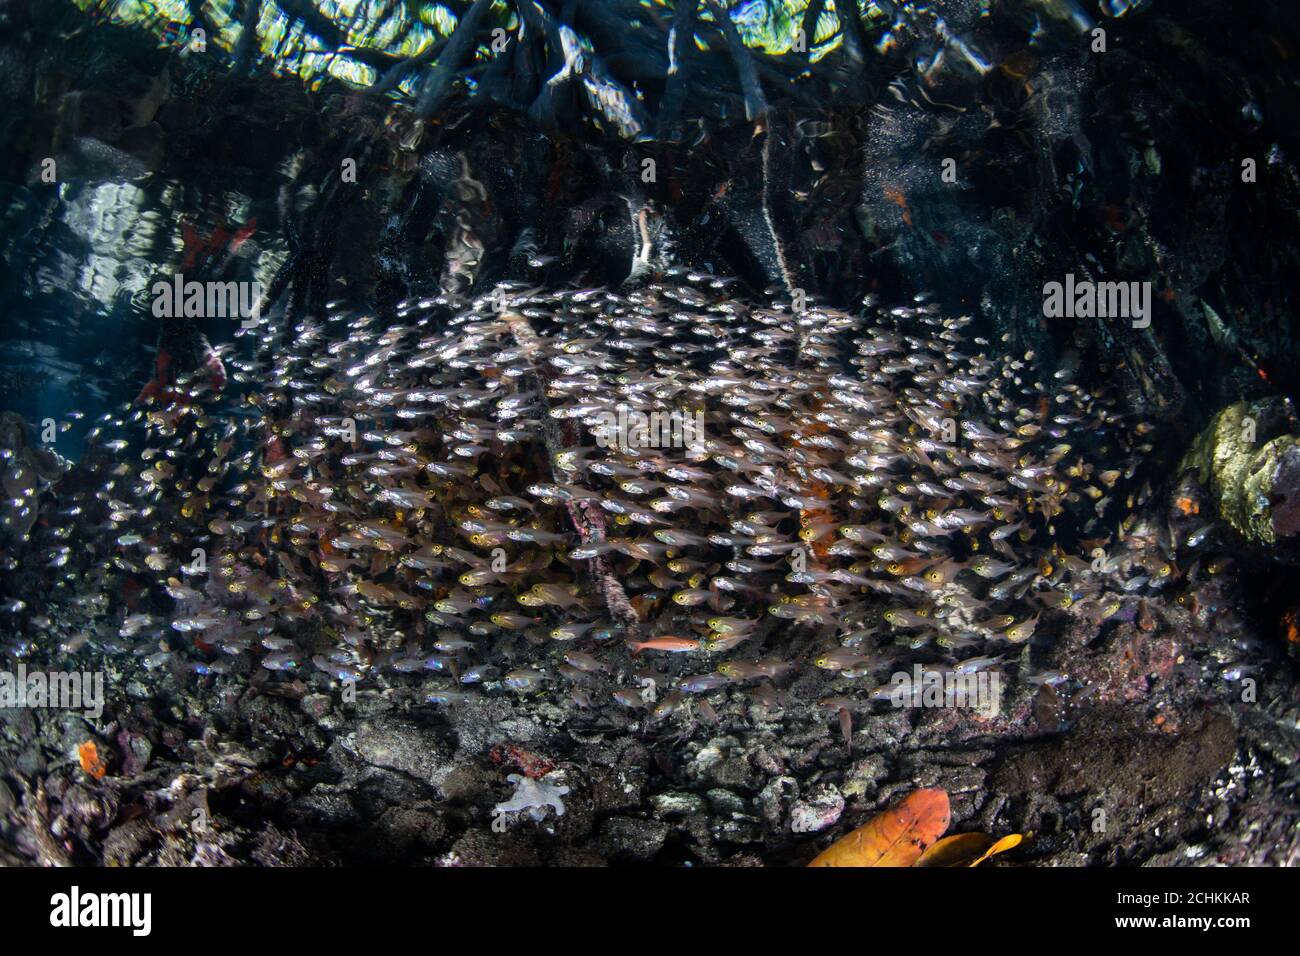 A thick school of cardinalfish hover at the edge of a mangrove forest in Raja Ampat. This tropical area is known for its high marine biodiversity. Stock Photo